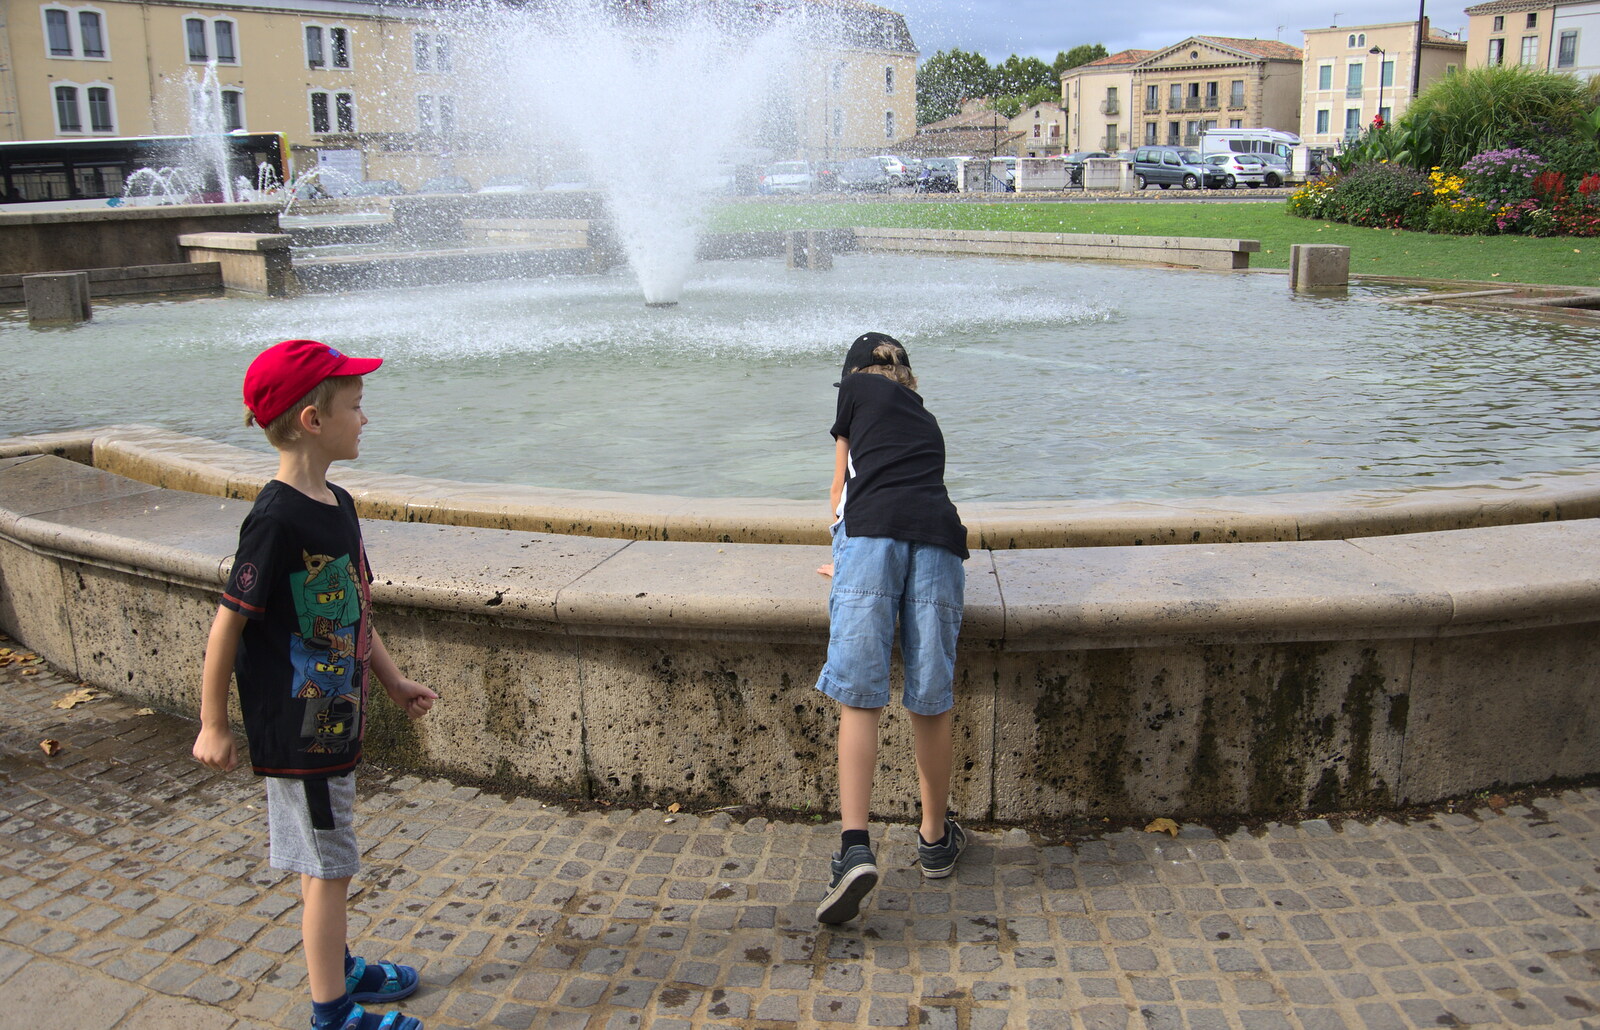 The boys play in a fountain from Abbaye Sainte-Marie de Lagrasse and The Lac de la Cavayère, Aude, France - 10th August